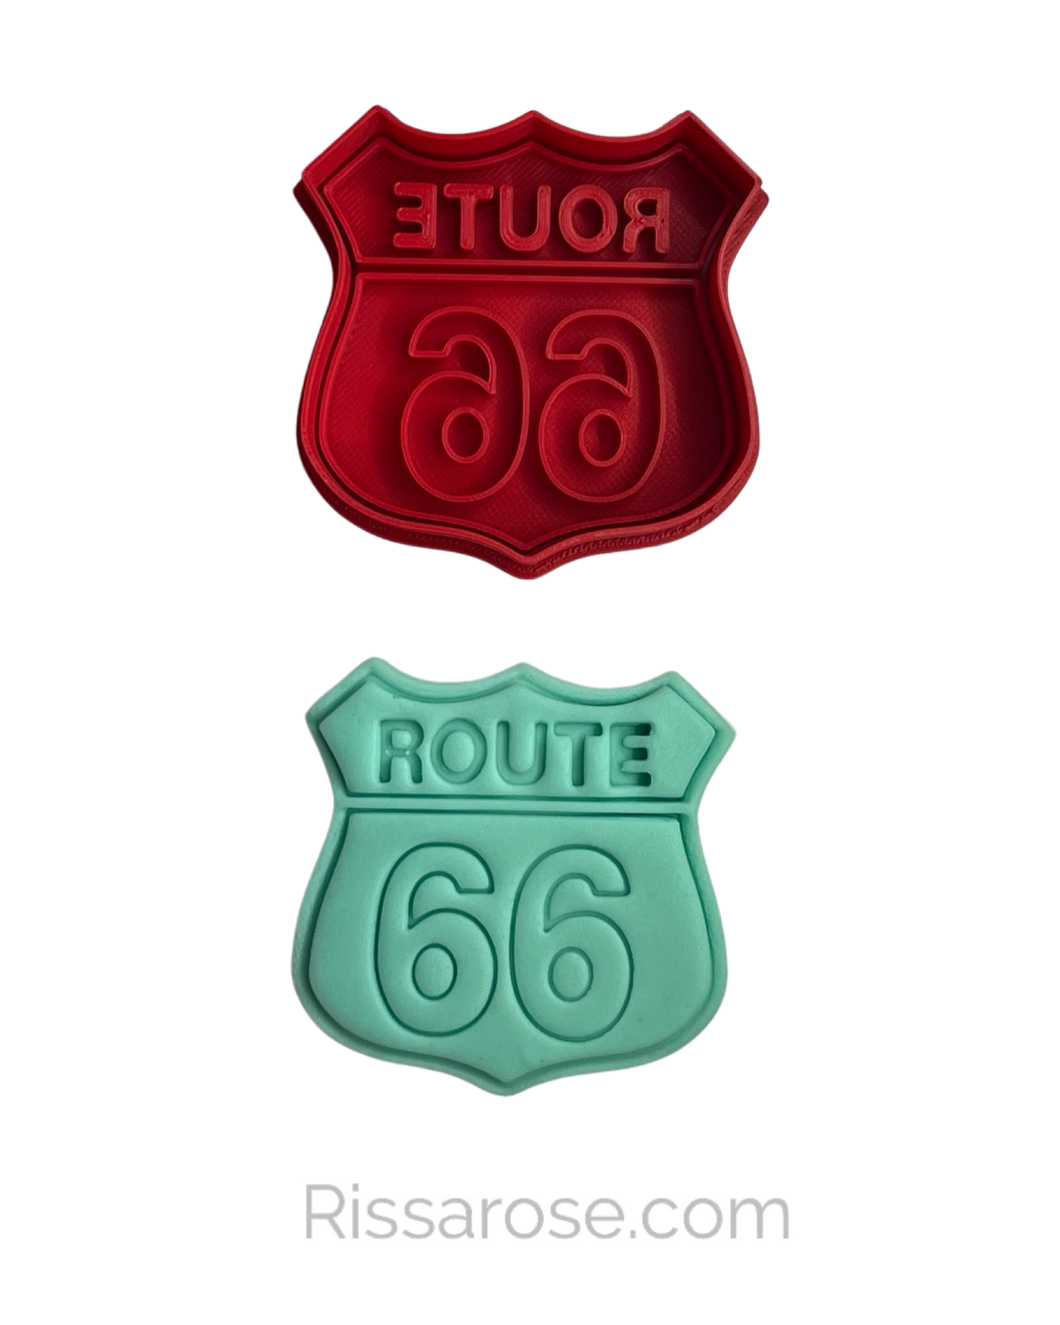 Route 66 shaped cookie cutter stamp